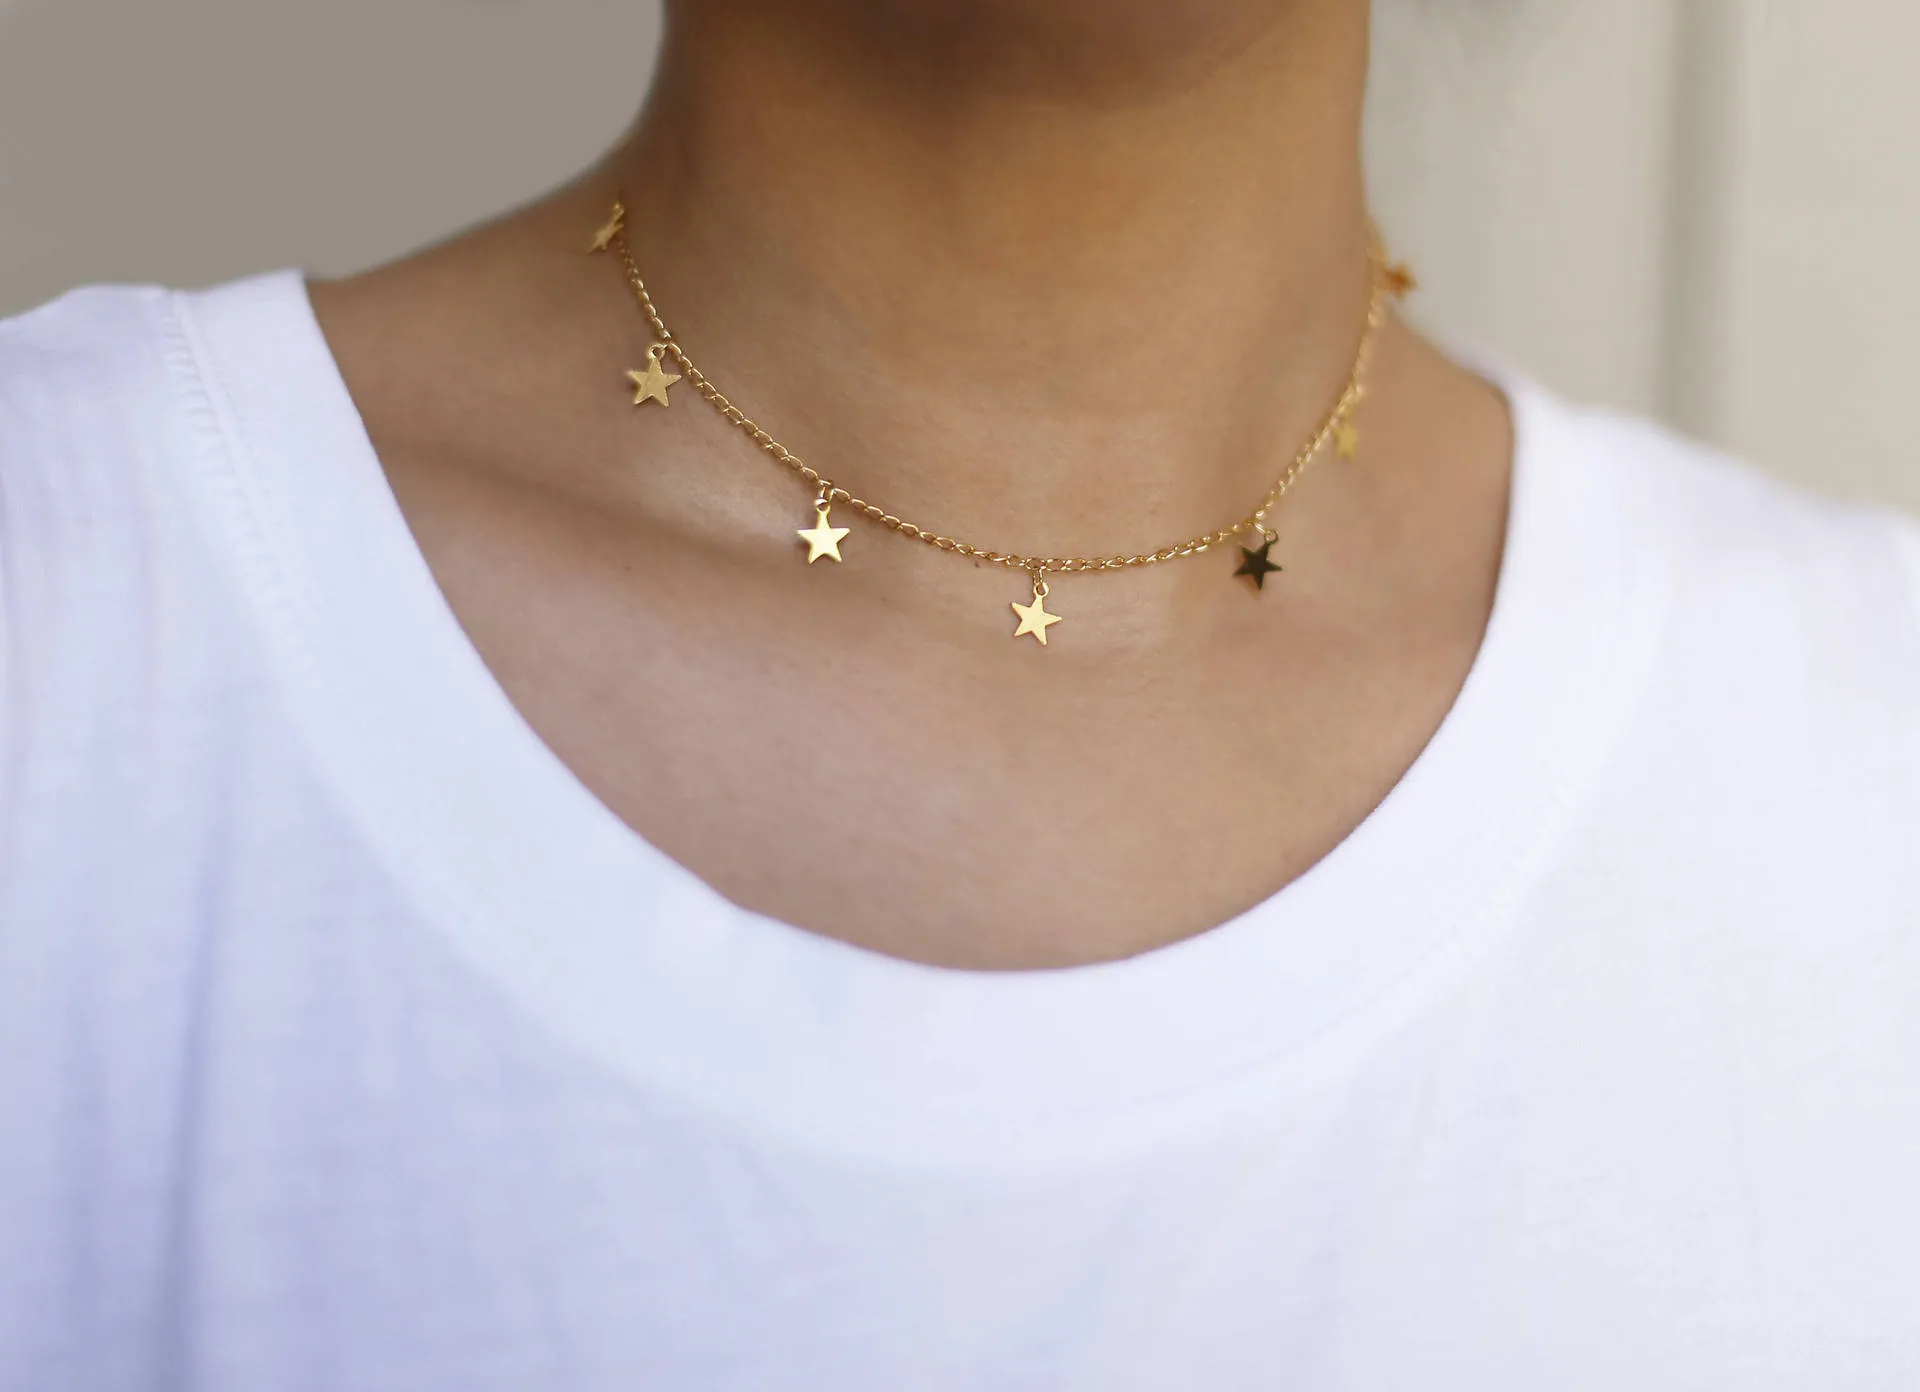 Buy Multi Star Necklace, Gold Star Necklace, Tiny Star Necklace, Star Chain  Necklace, Star Gift for Women, Dainty Star Necklace, Star Choker Online in  India - Etsy